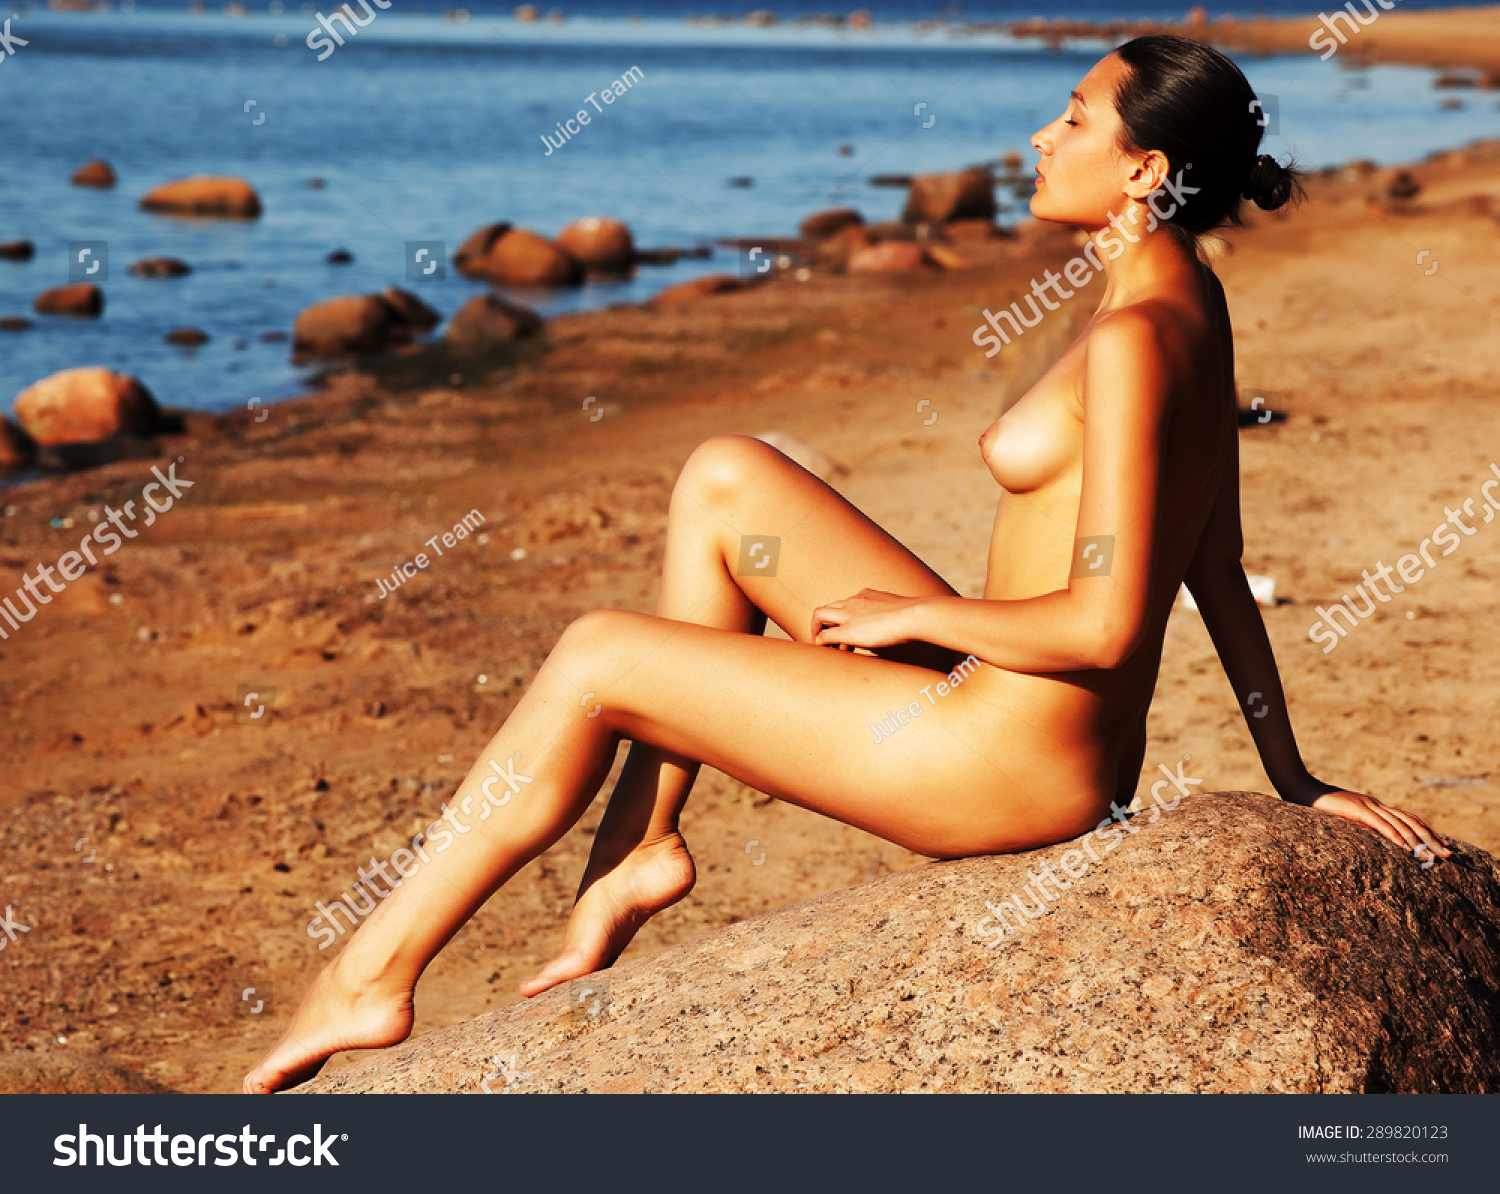 canna bis recommends Naked Woman On Beach